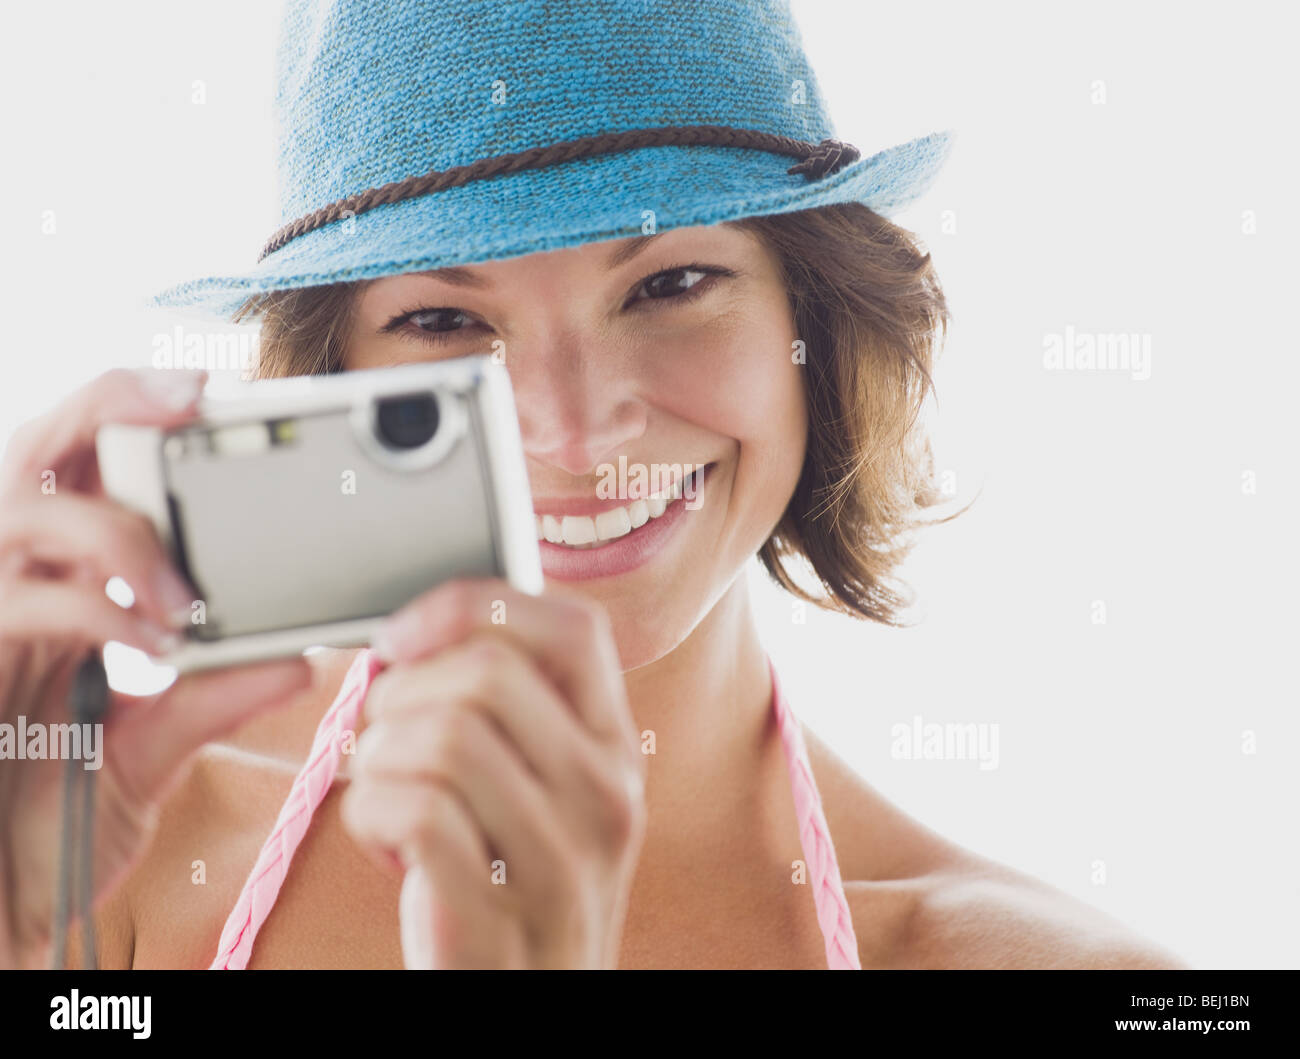 Woman taking a picture with a digital camera Stock Photo